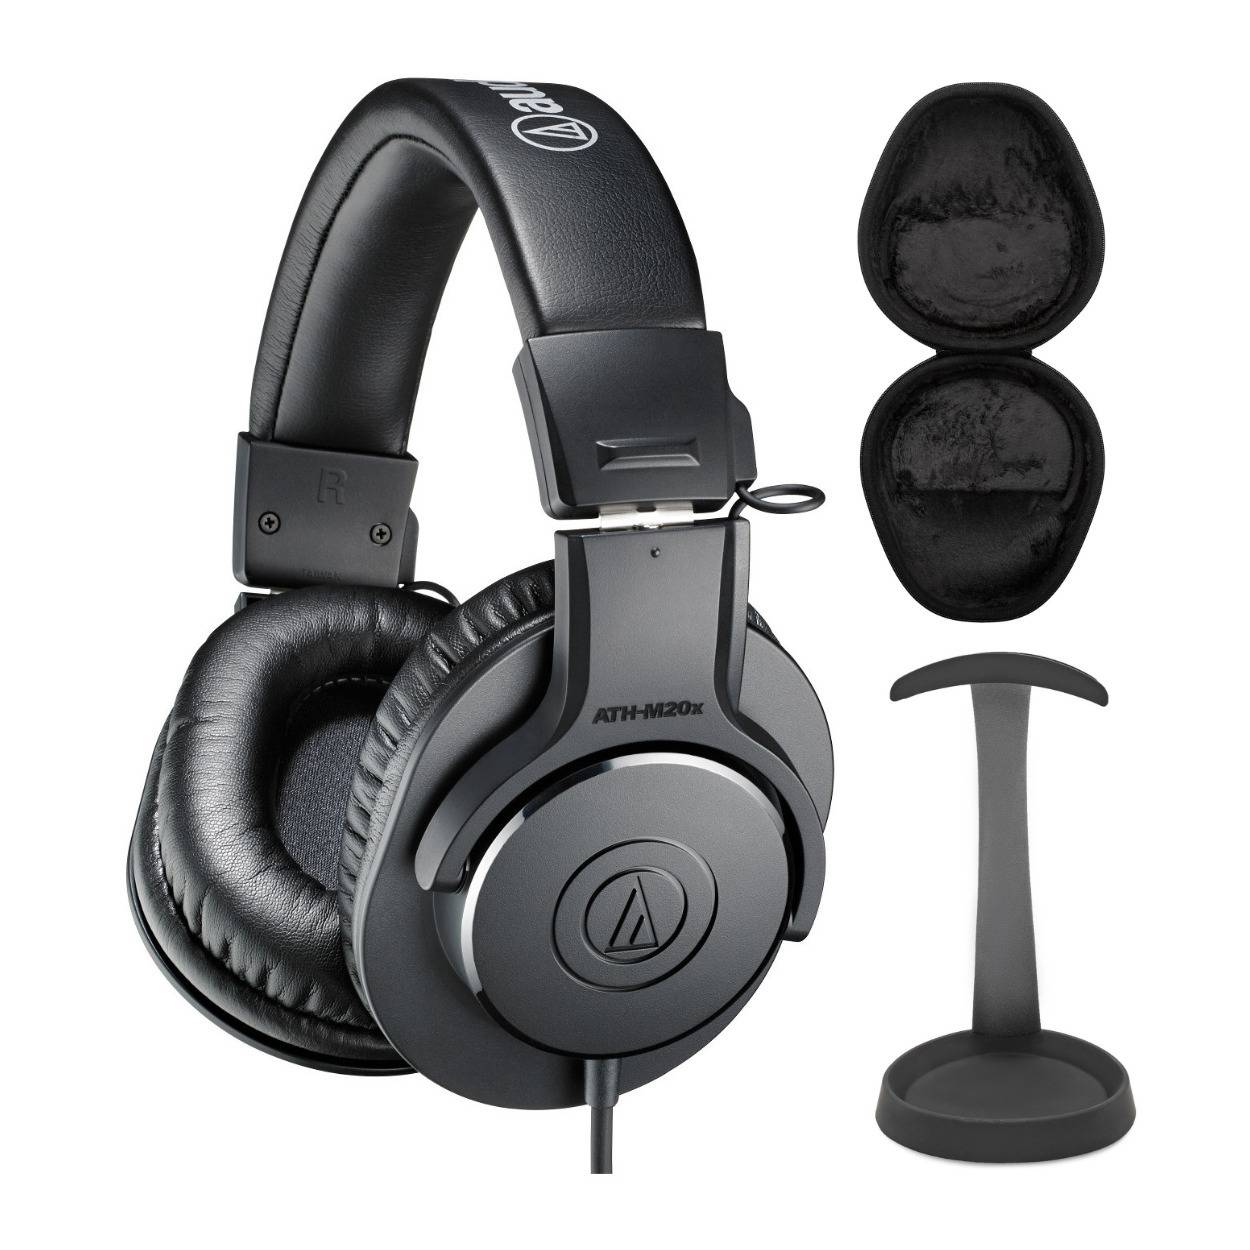 Audio-Technica ATH-M20X Professional Monitor Headphones (Black) with Knox Gear Stand and Case